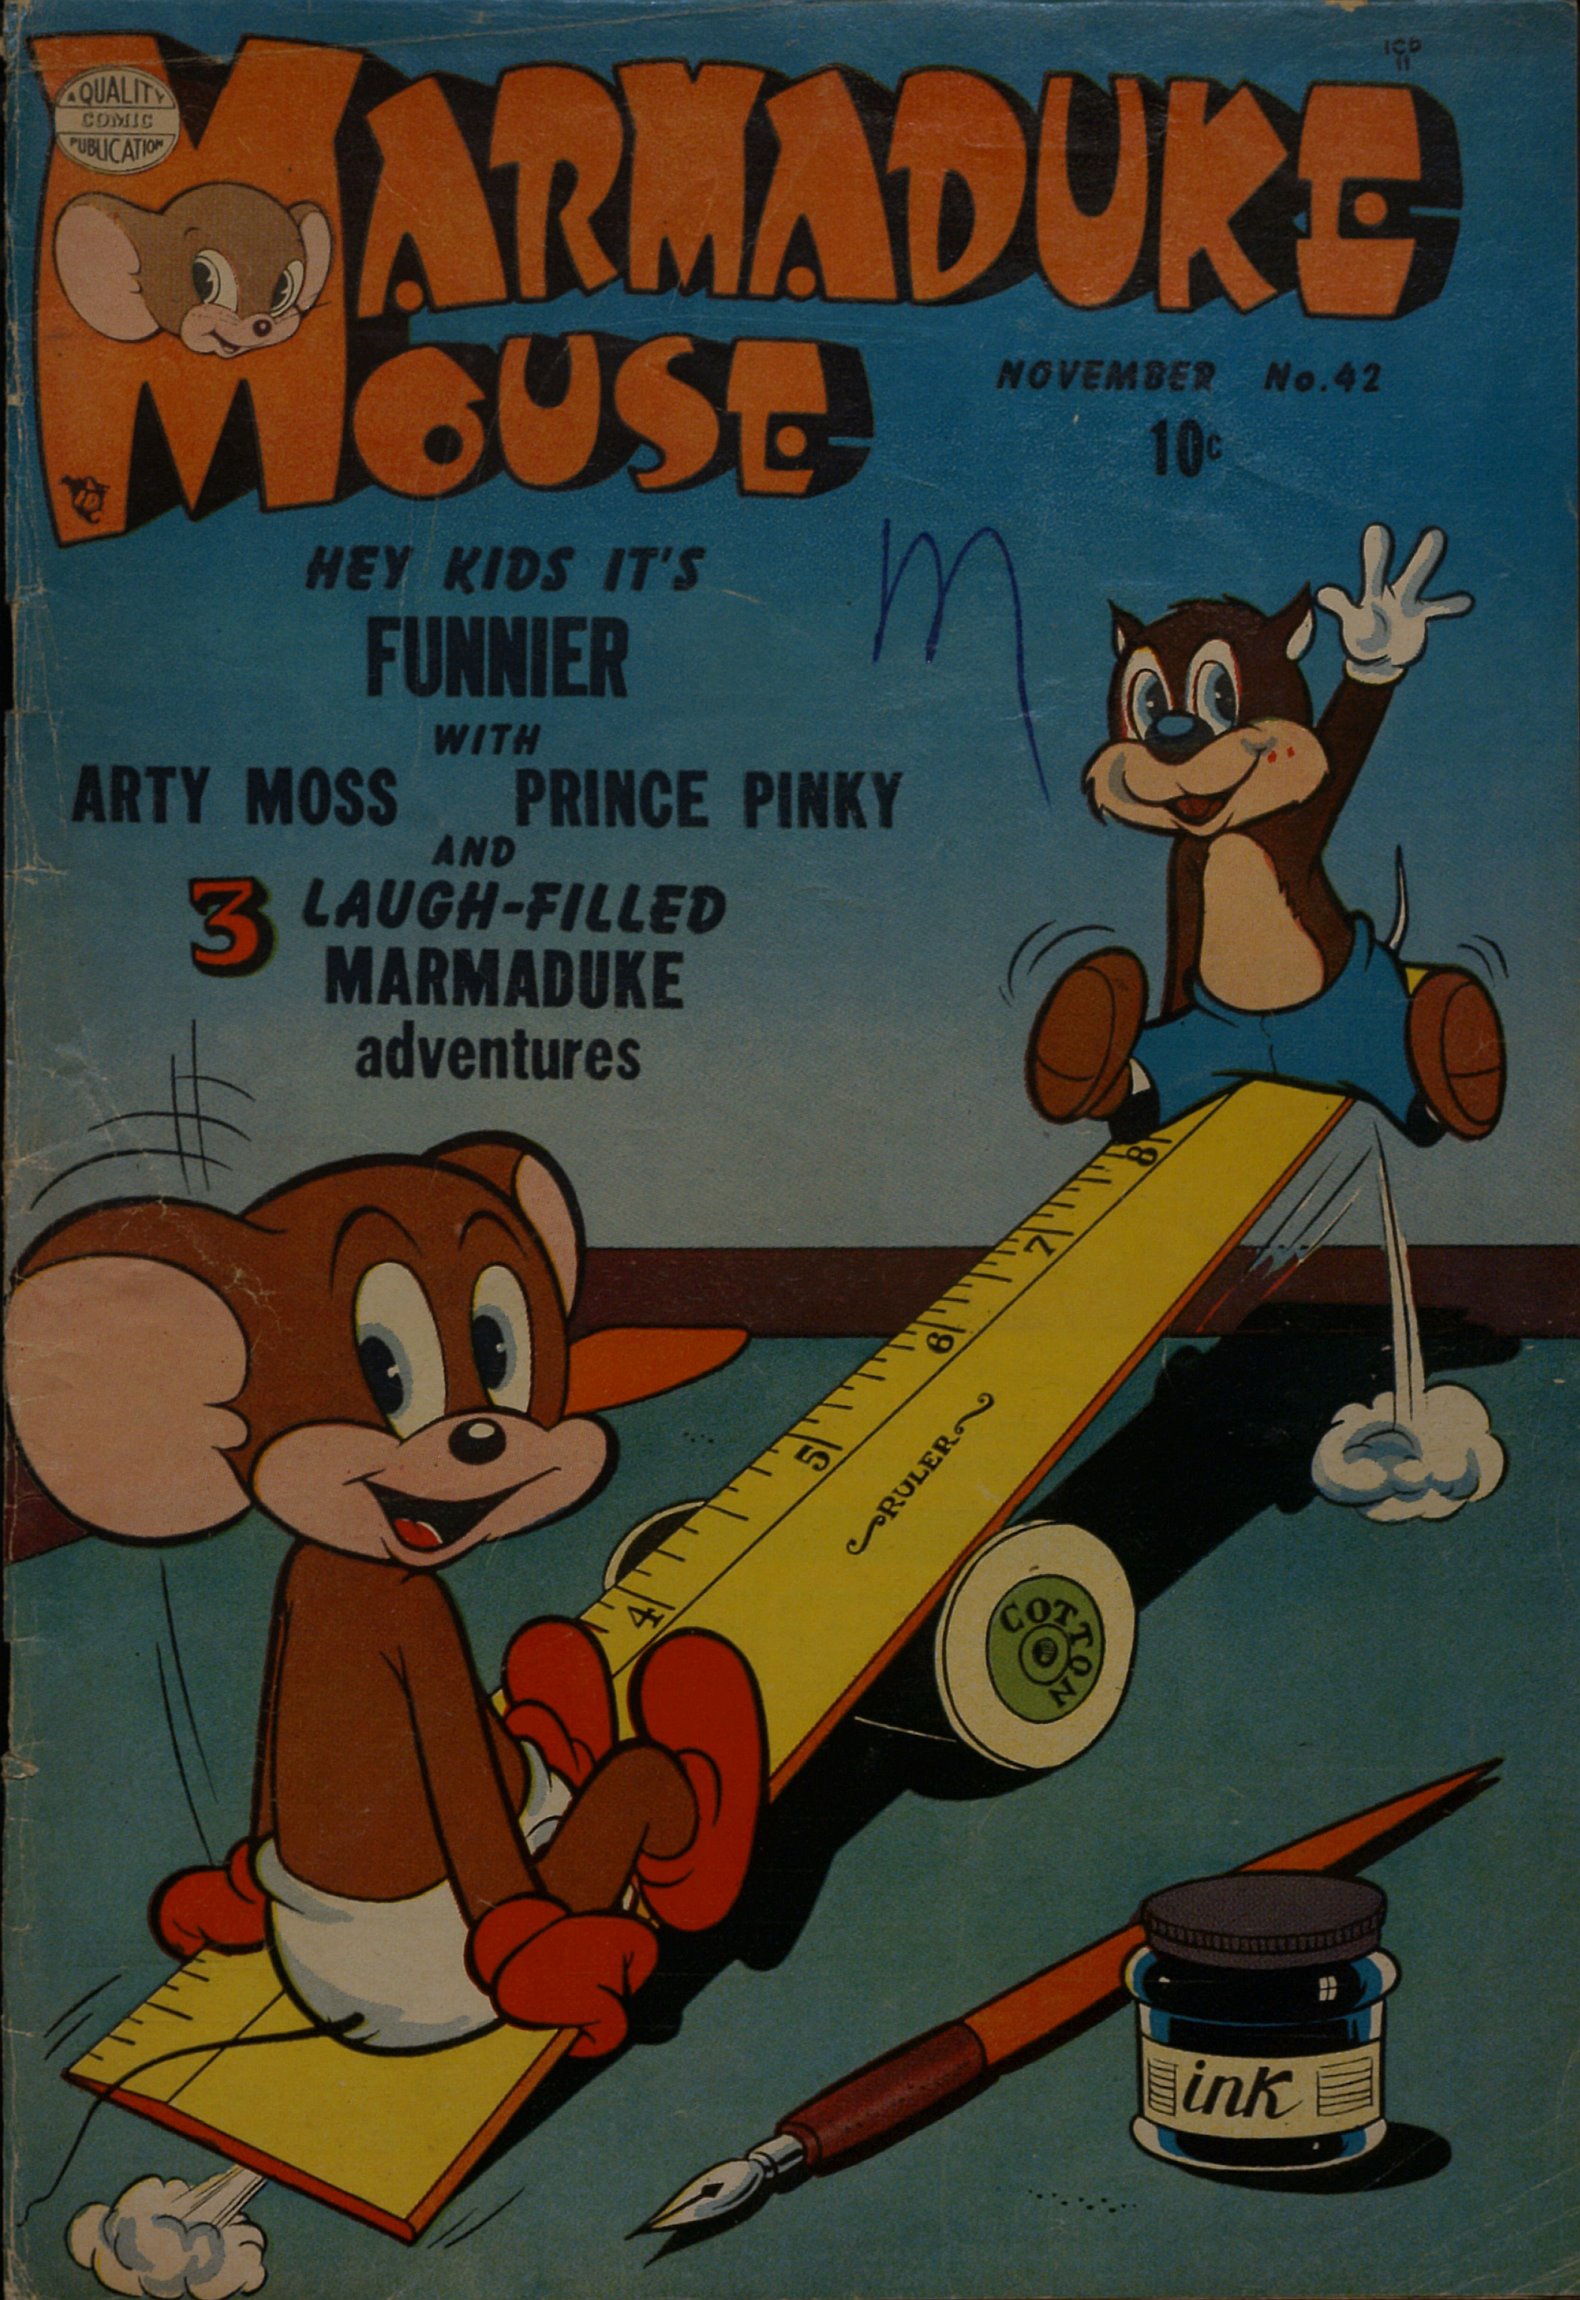 Read online Marmaduke Mouse comic -  Issue #42 - 1